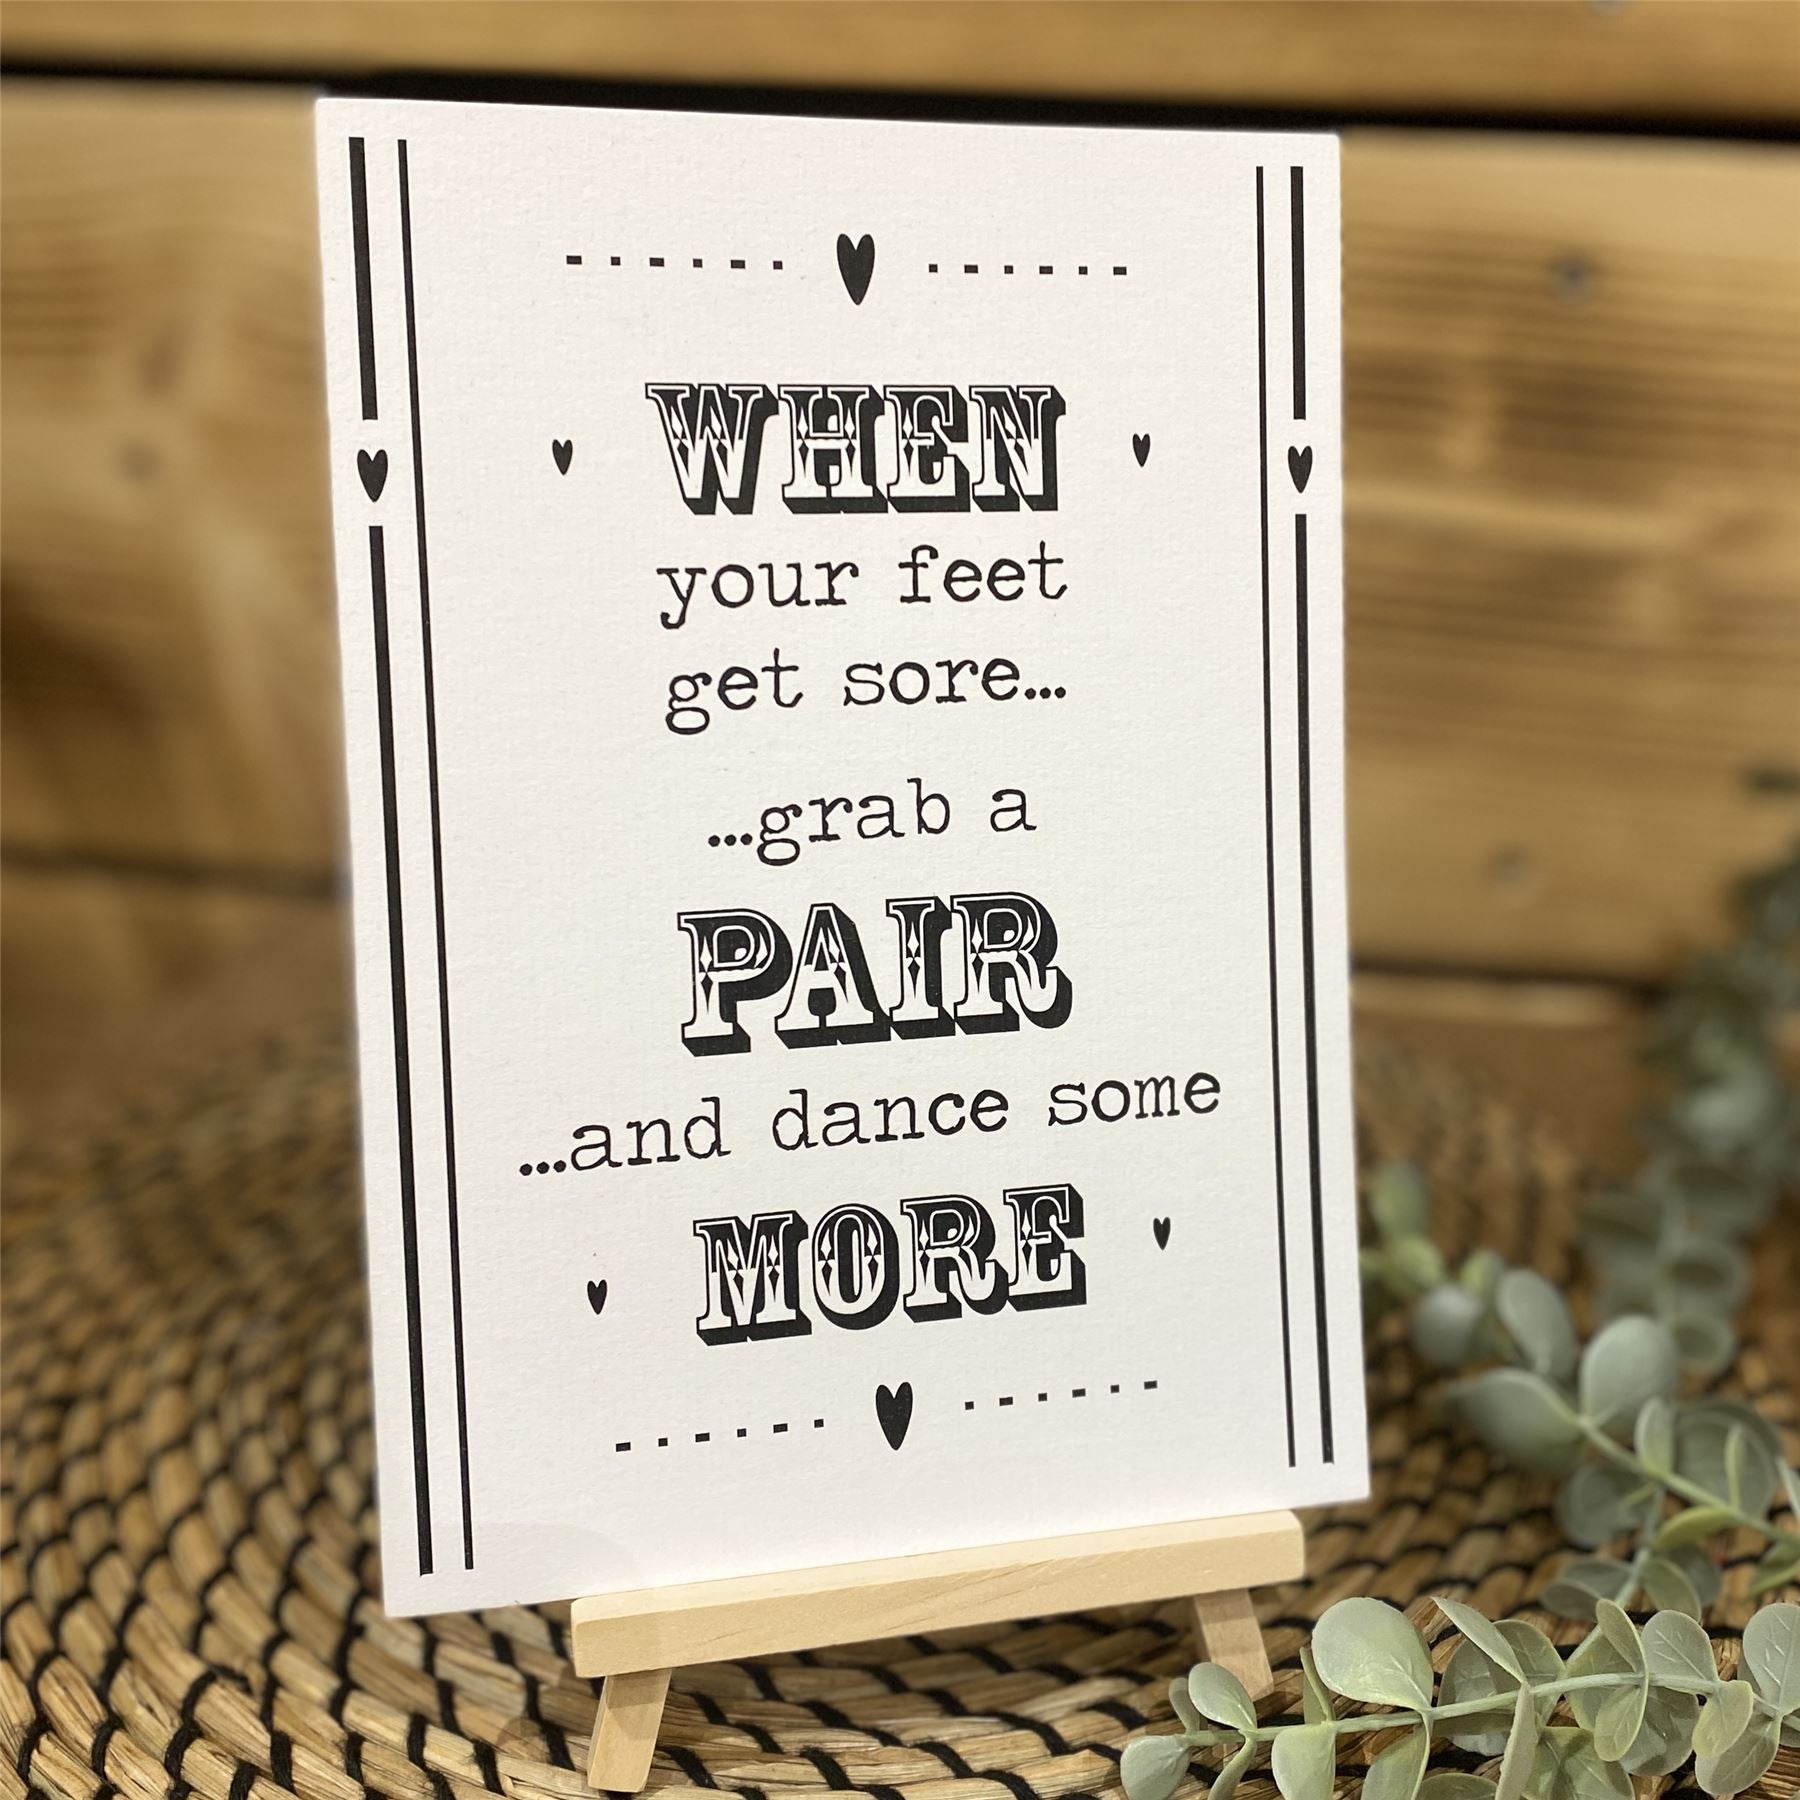 grab-a-pair-and-dance-some-more-wedding-sign-a5-white-card-and-easel|LLSTWDSM|Luck and Luck| 1